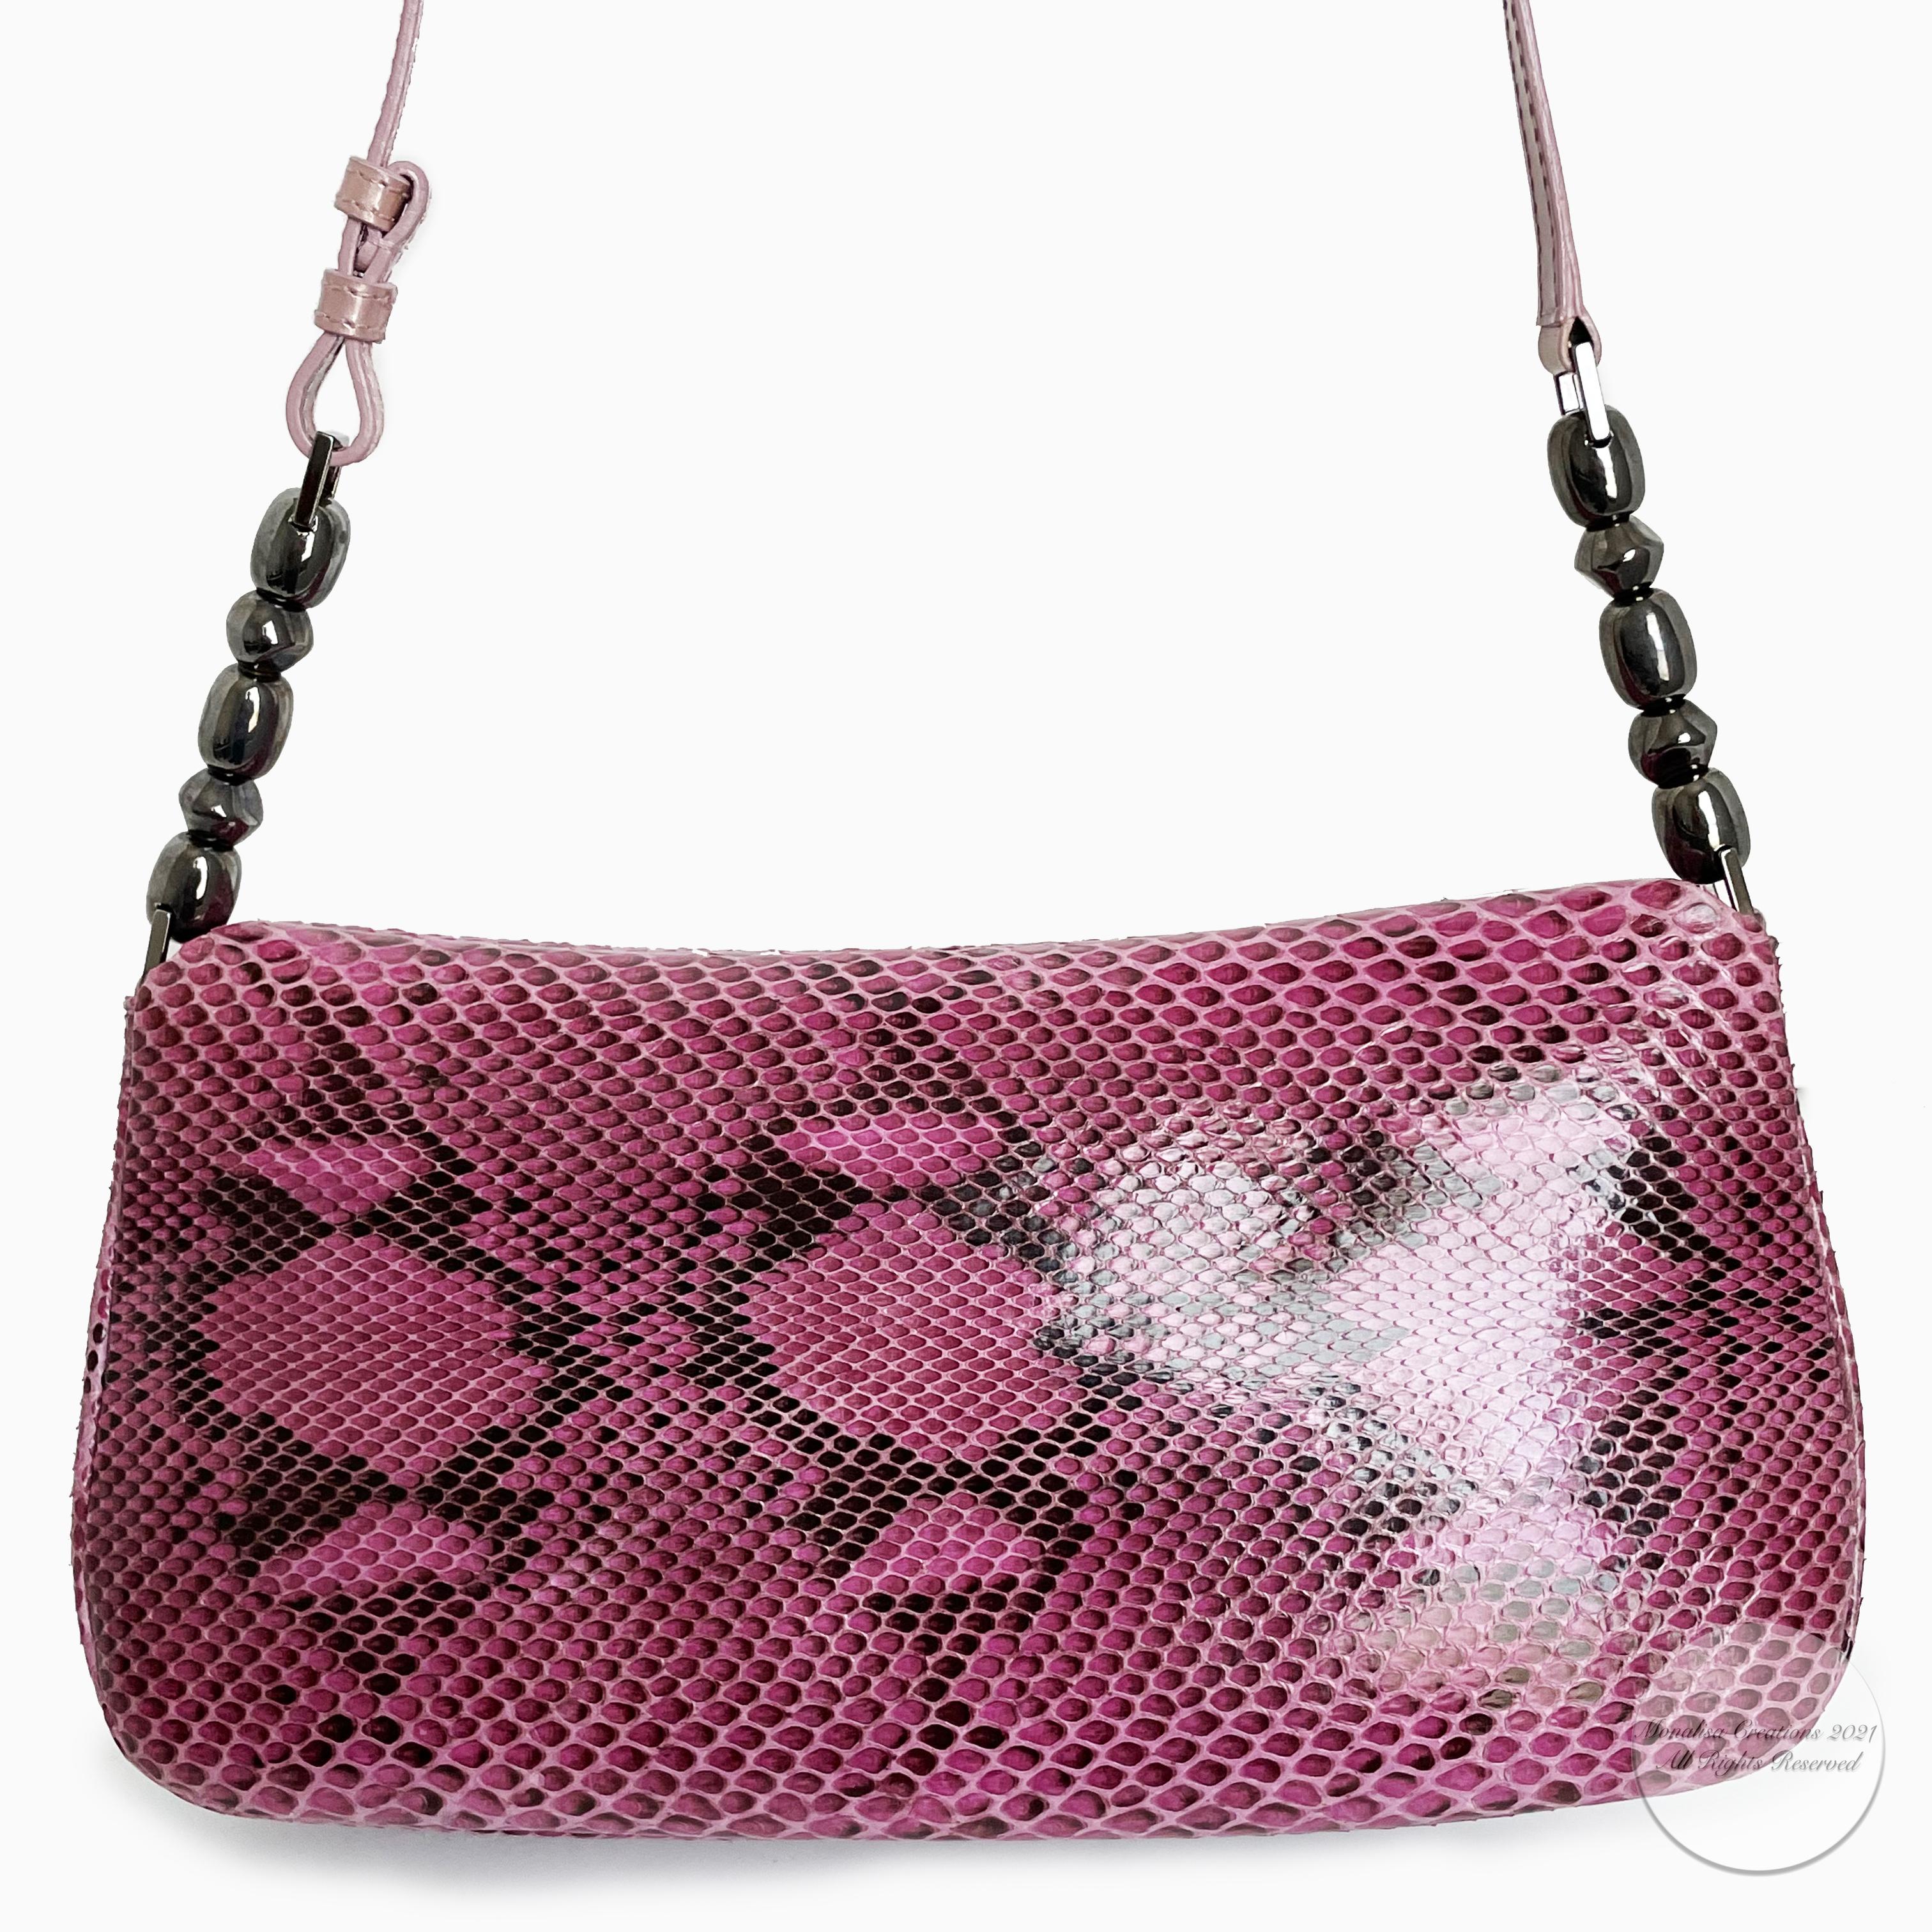 Women's Christian Dior Malice Flap Bag Pink Python Exotic Snakeskin Leather with COA